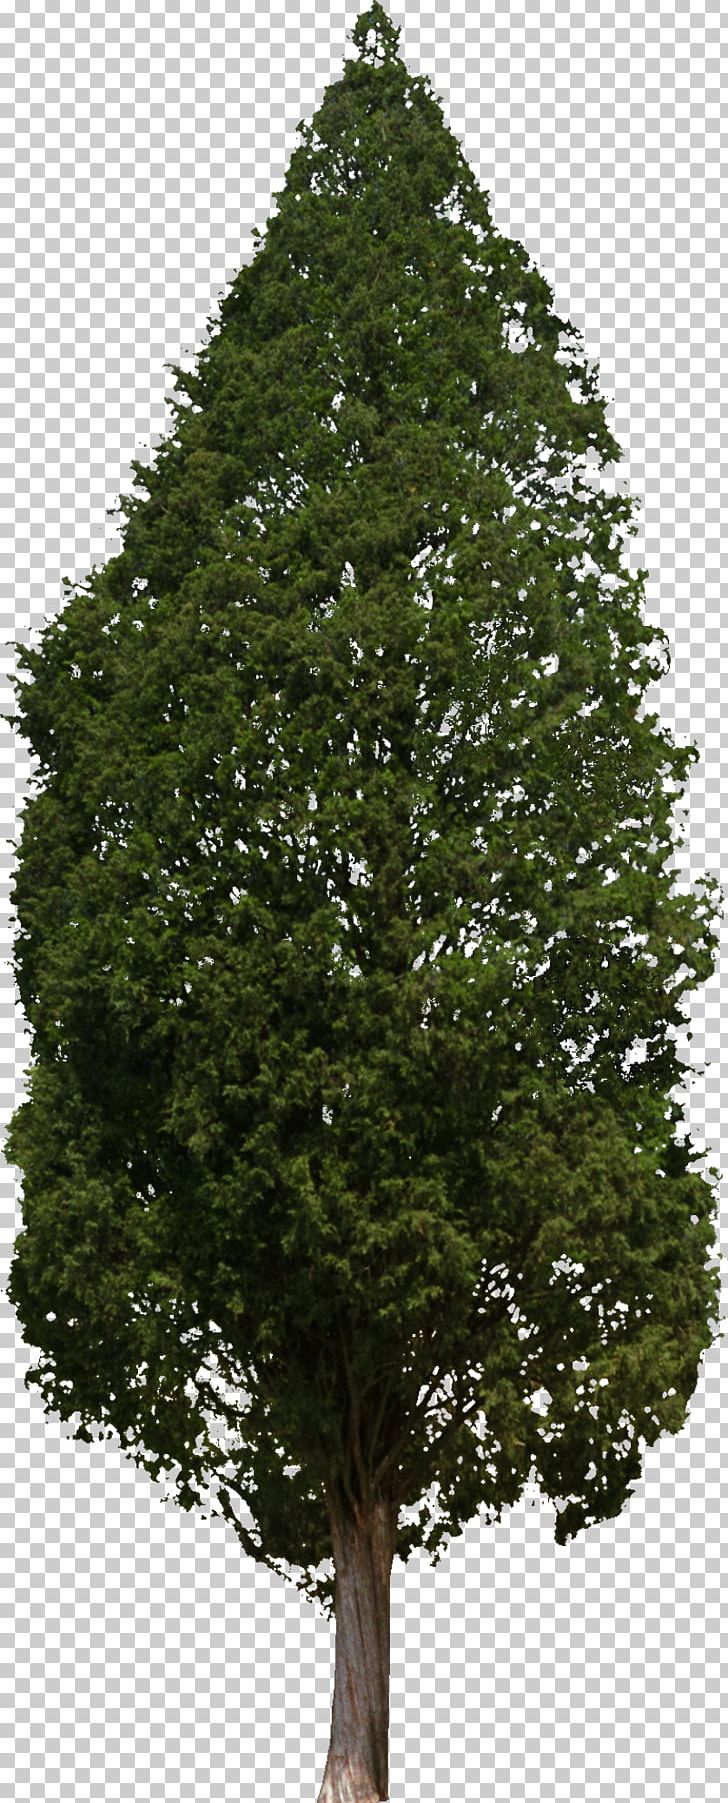 Tree Woody Plant Conifers Hinoki Cypress PNG, Clipart, Biome, Branch, Bushes, Conifer, Conifers Free PNG Download